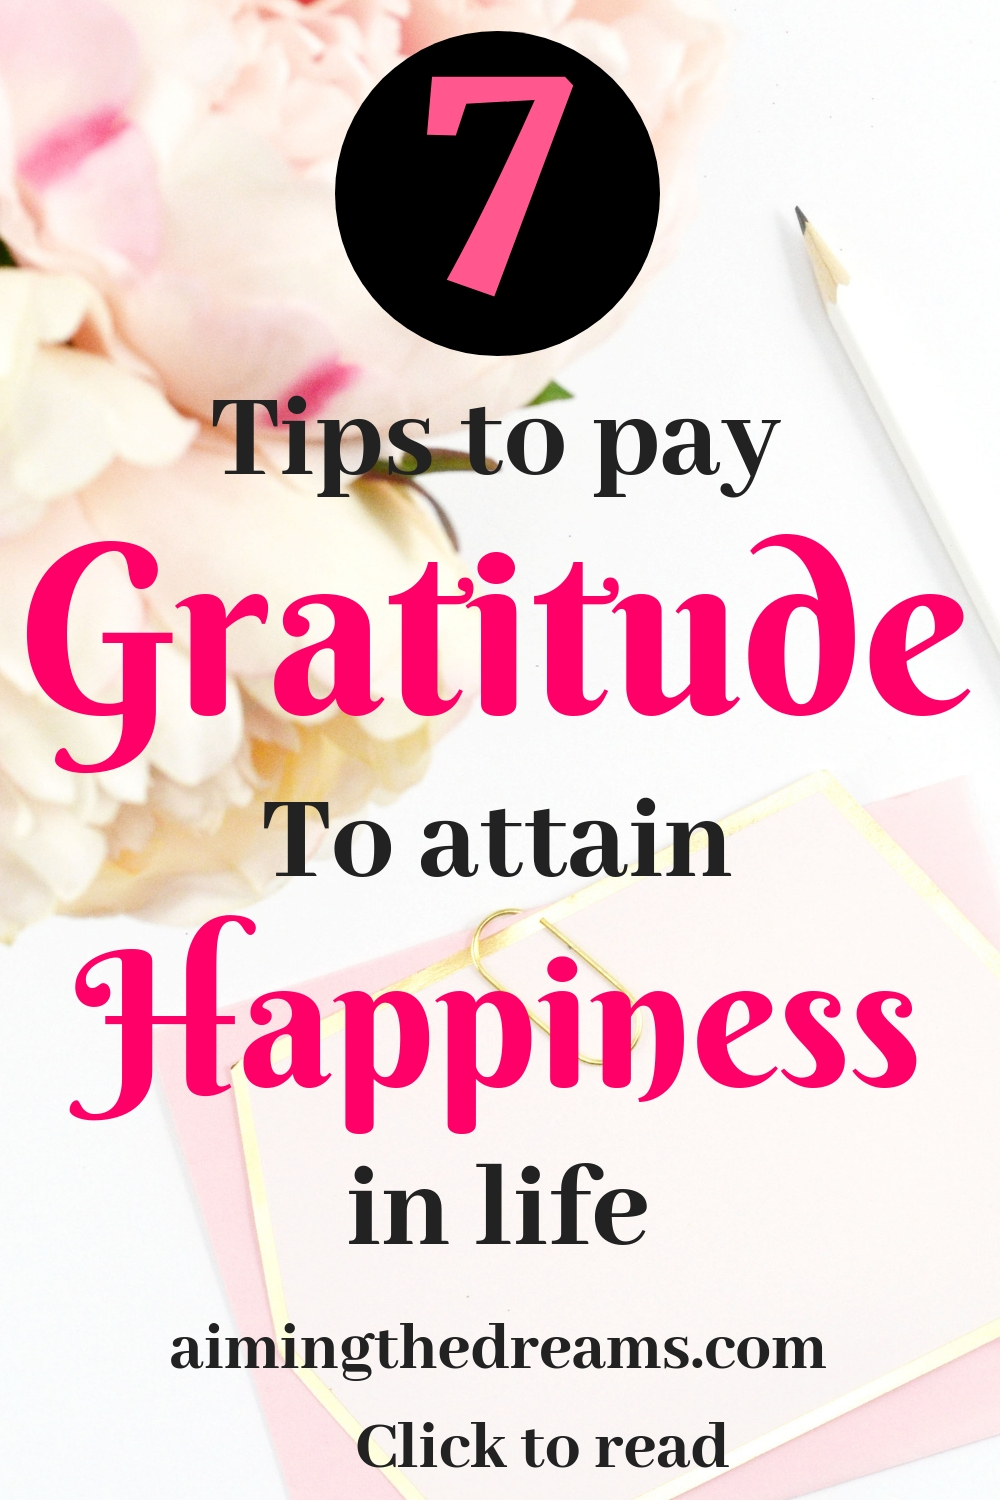 Practice gratitude to attain happiness and attract abundance in your life.